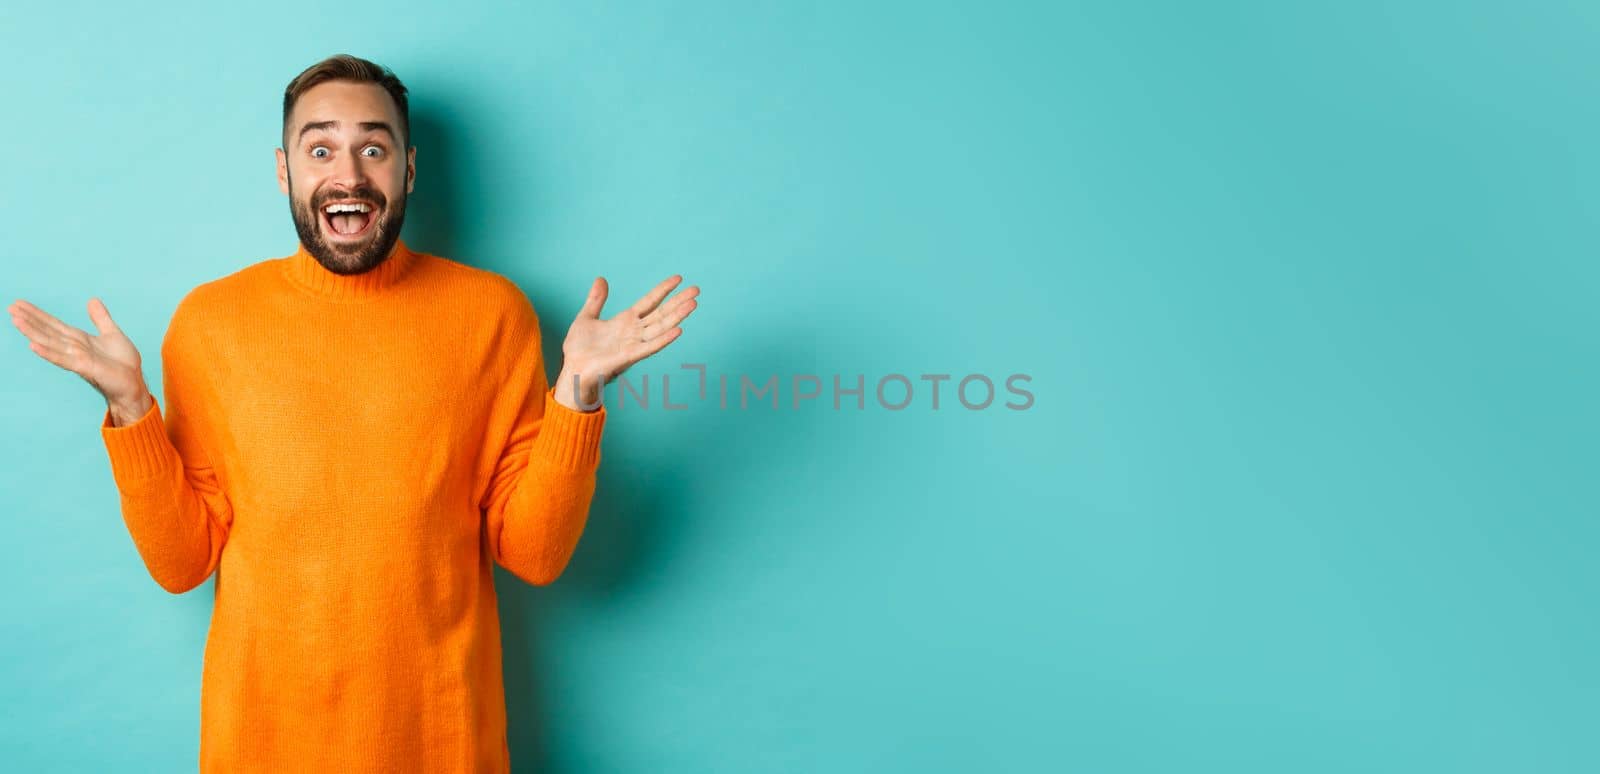 Surprised man raising hands up, looking at something amazing, standing over turquoise background in winter sweater.